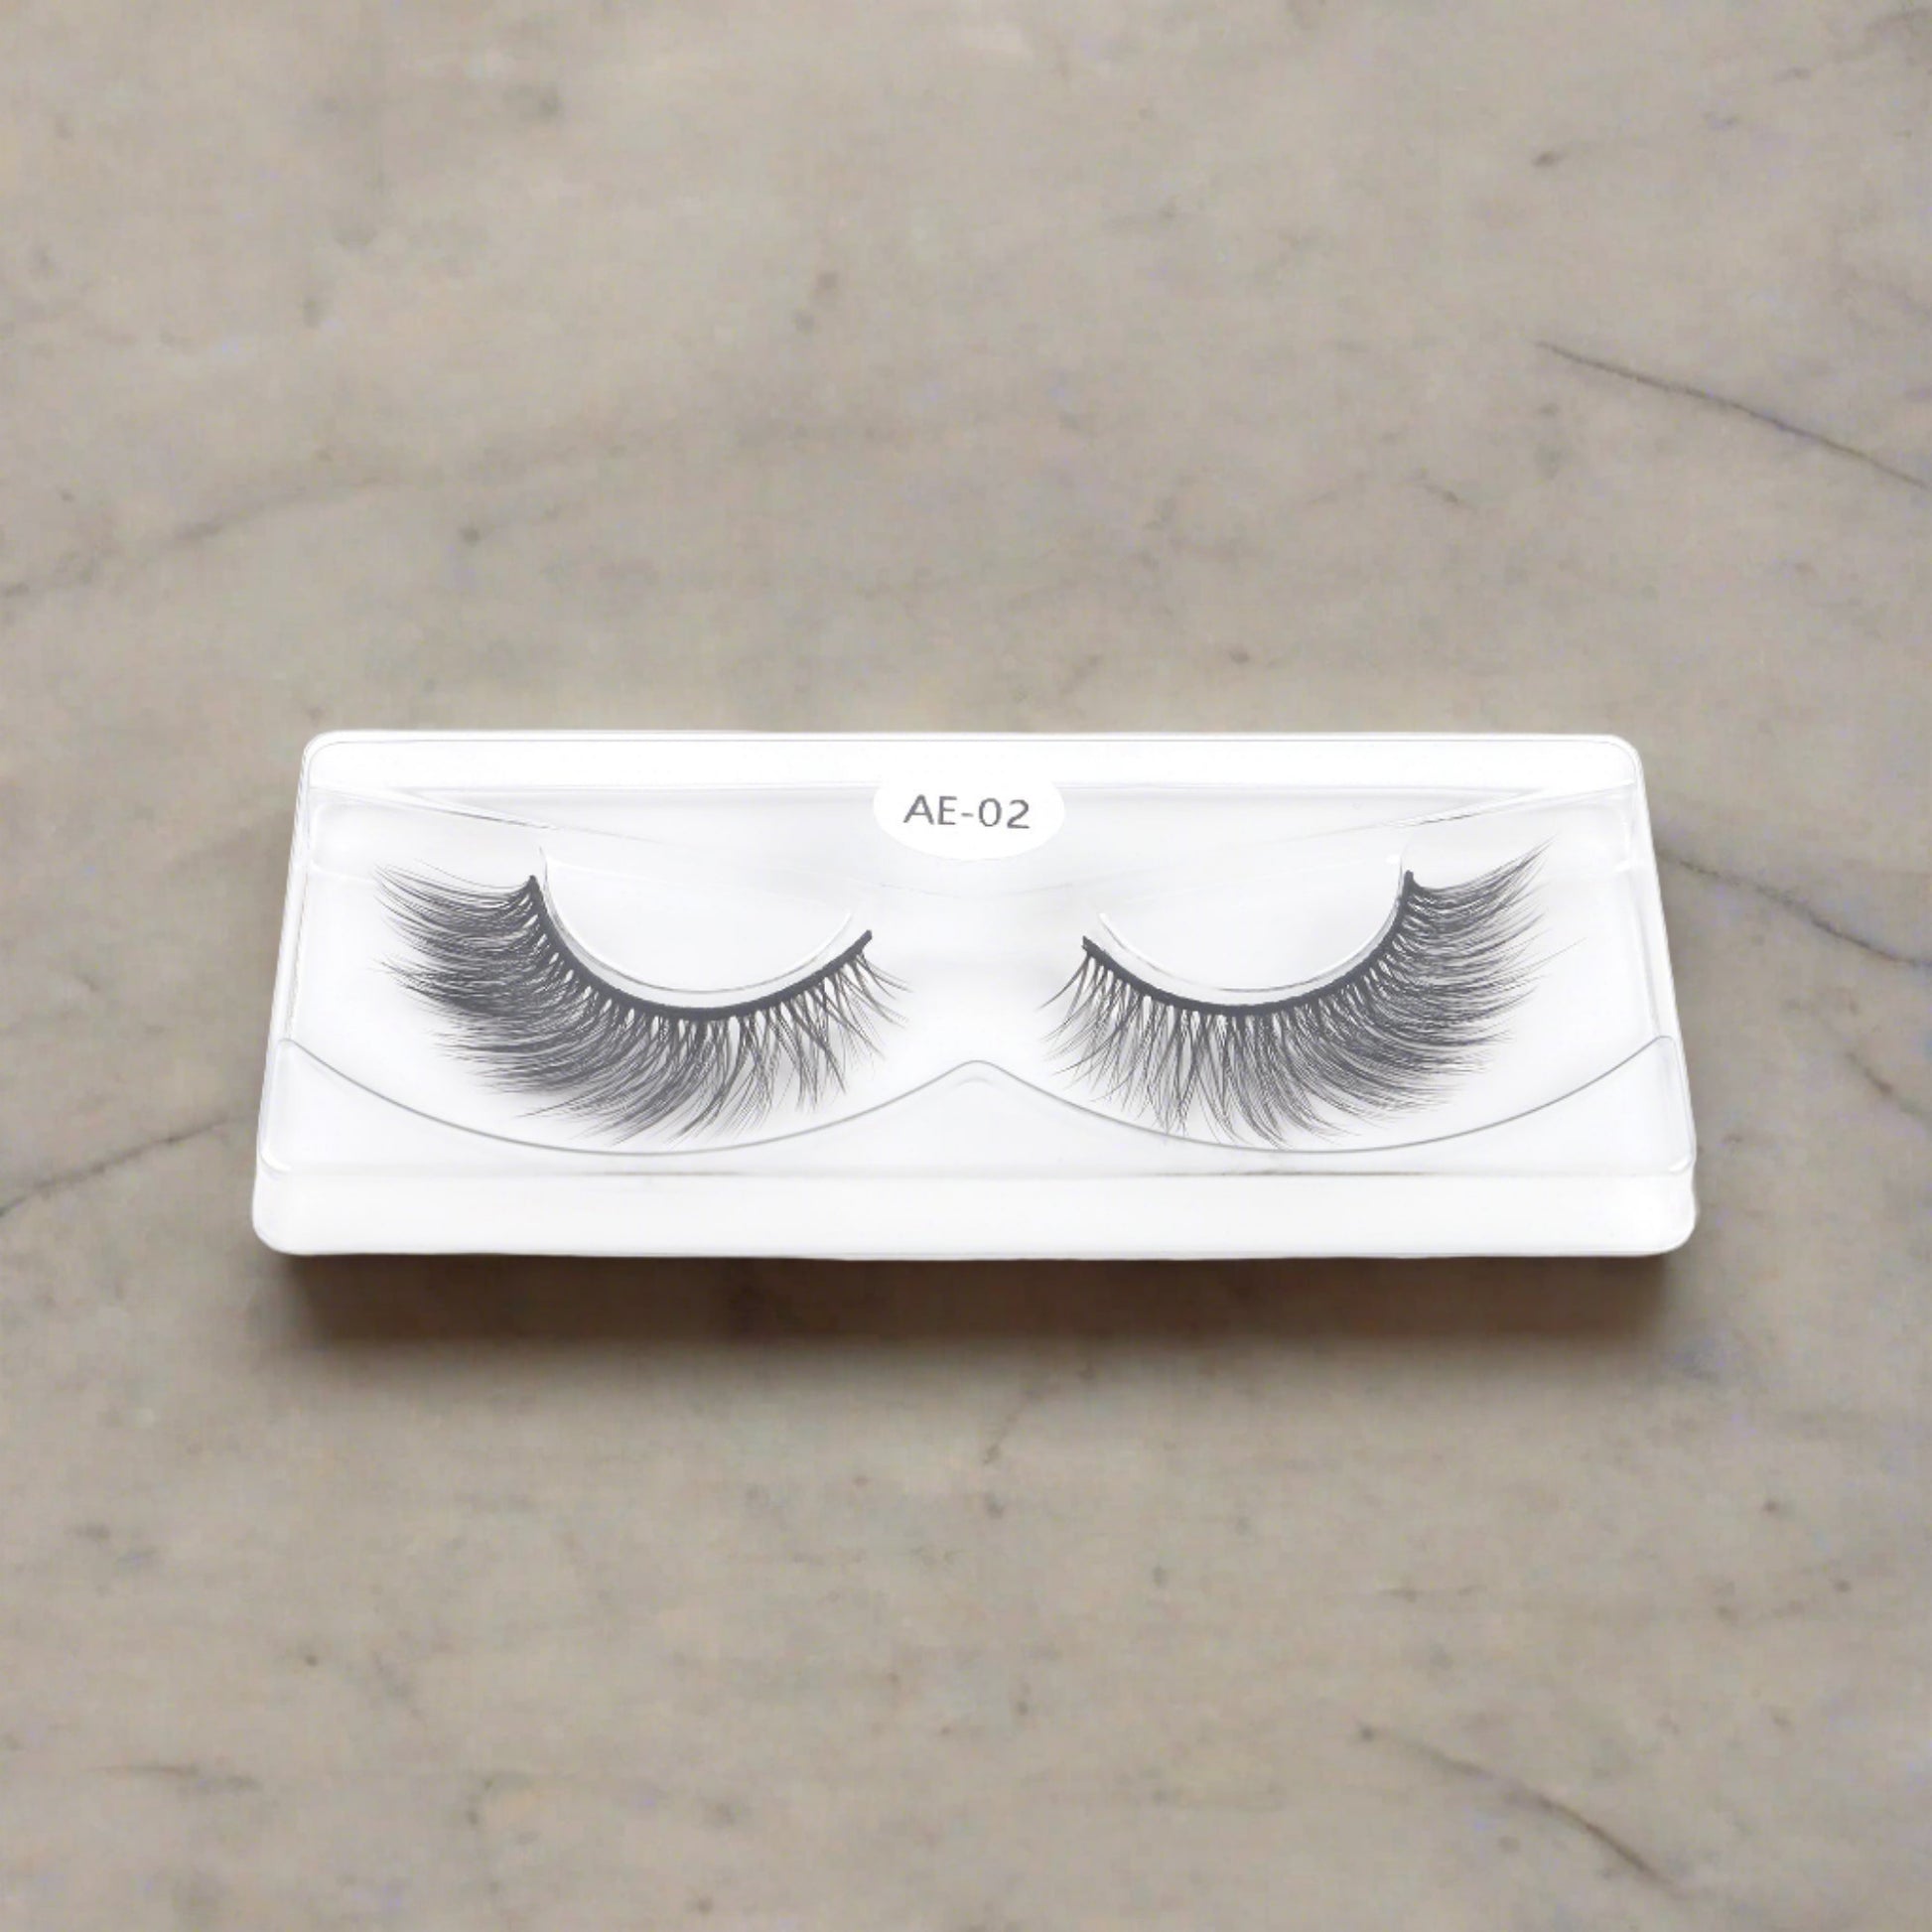 Cruelty-free false lashes by More Lips, providing a stunning enhancement to your eye makeup